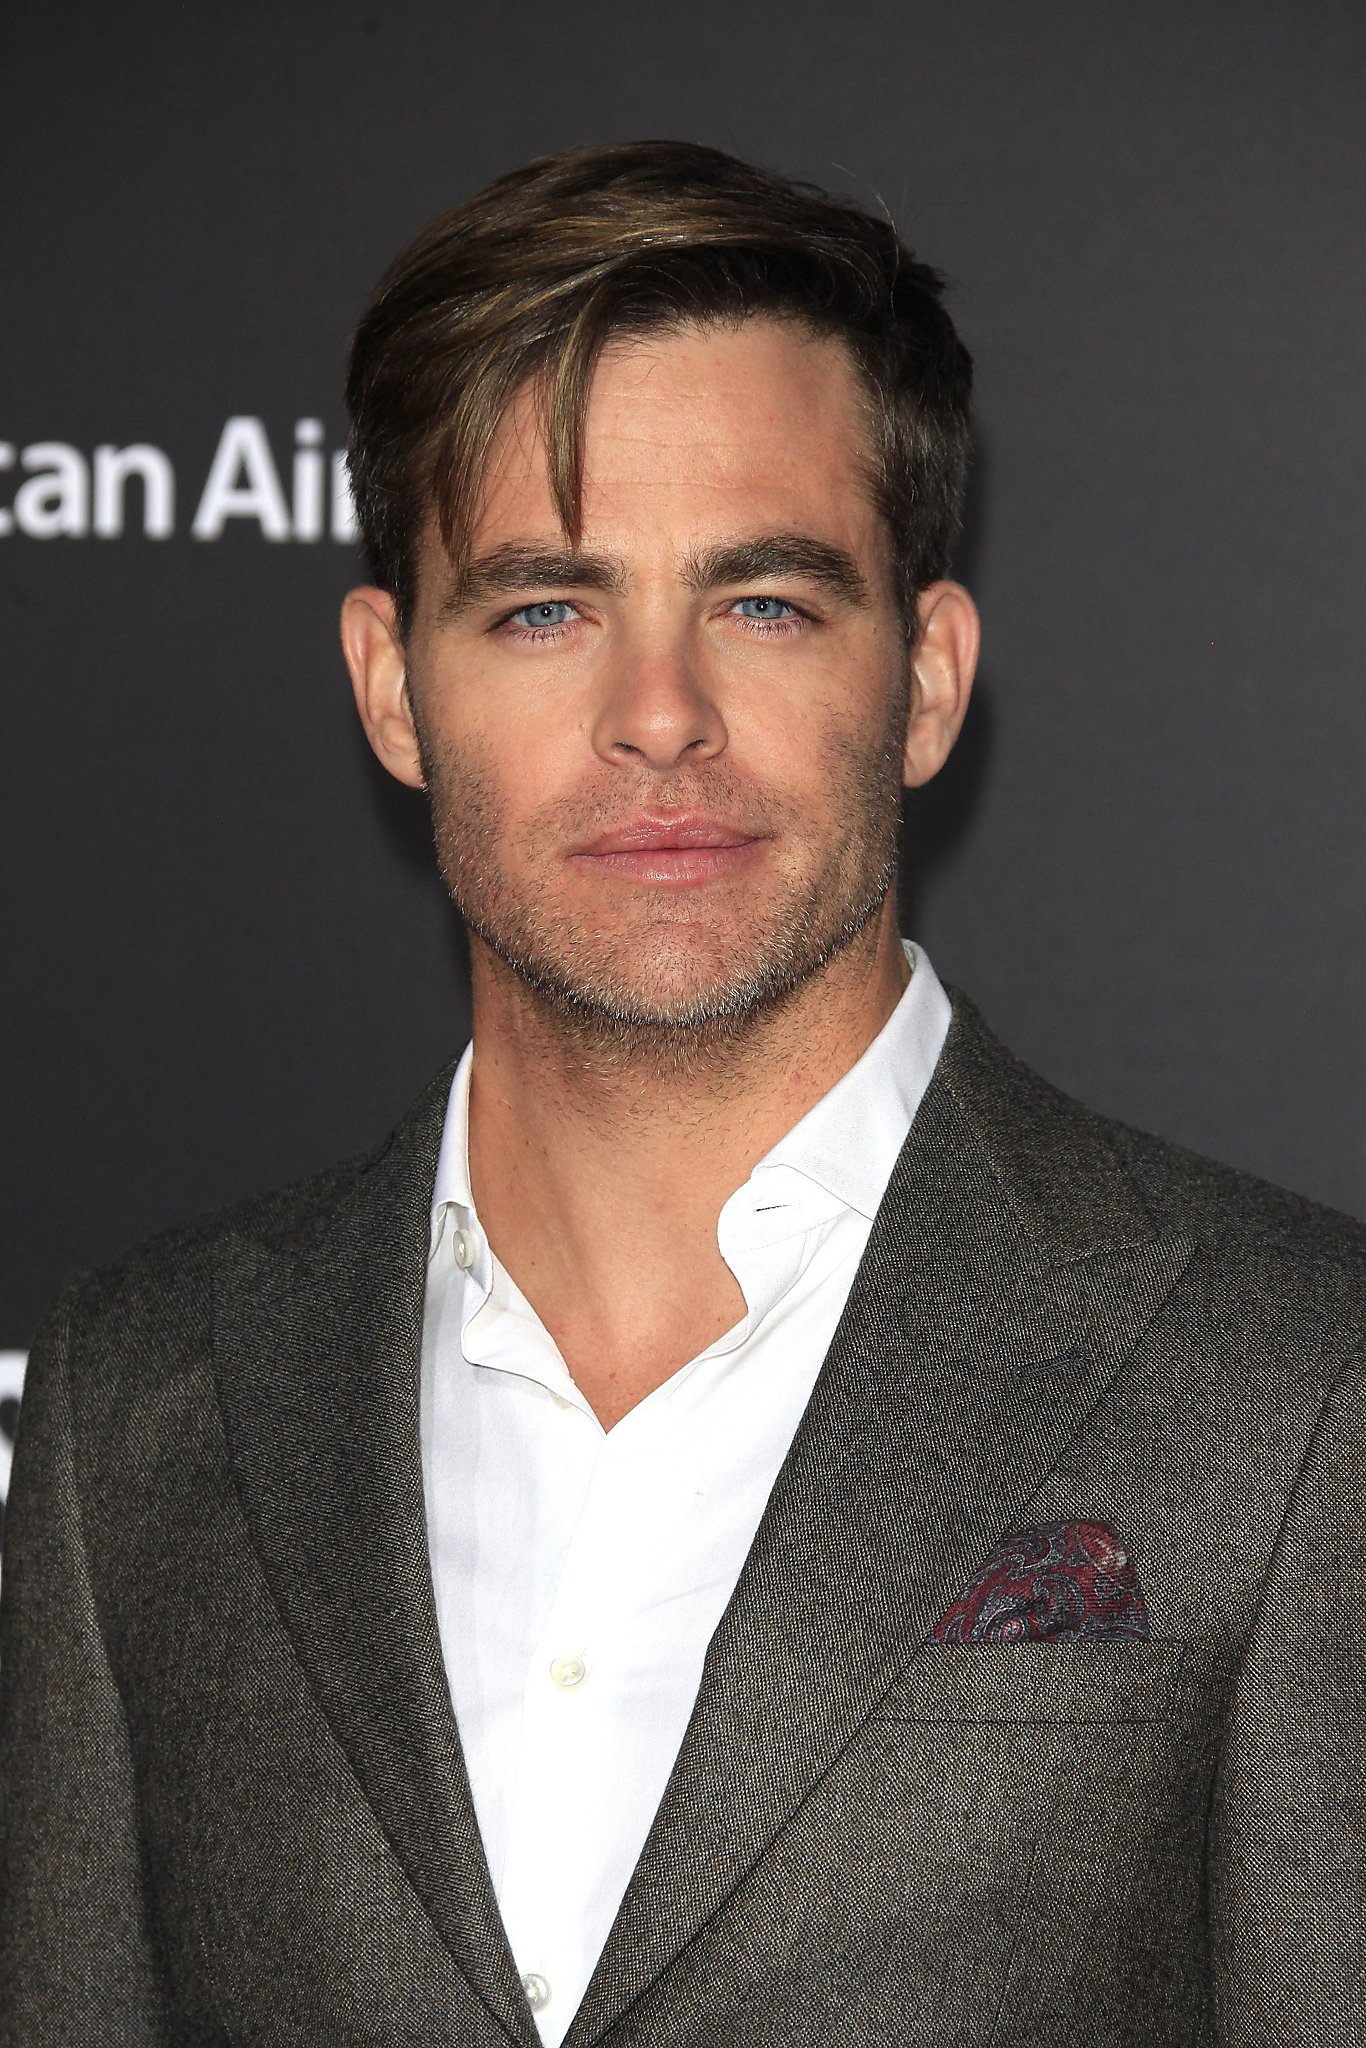 Chris Pine on his accidental career and ‘The Finest Hours’